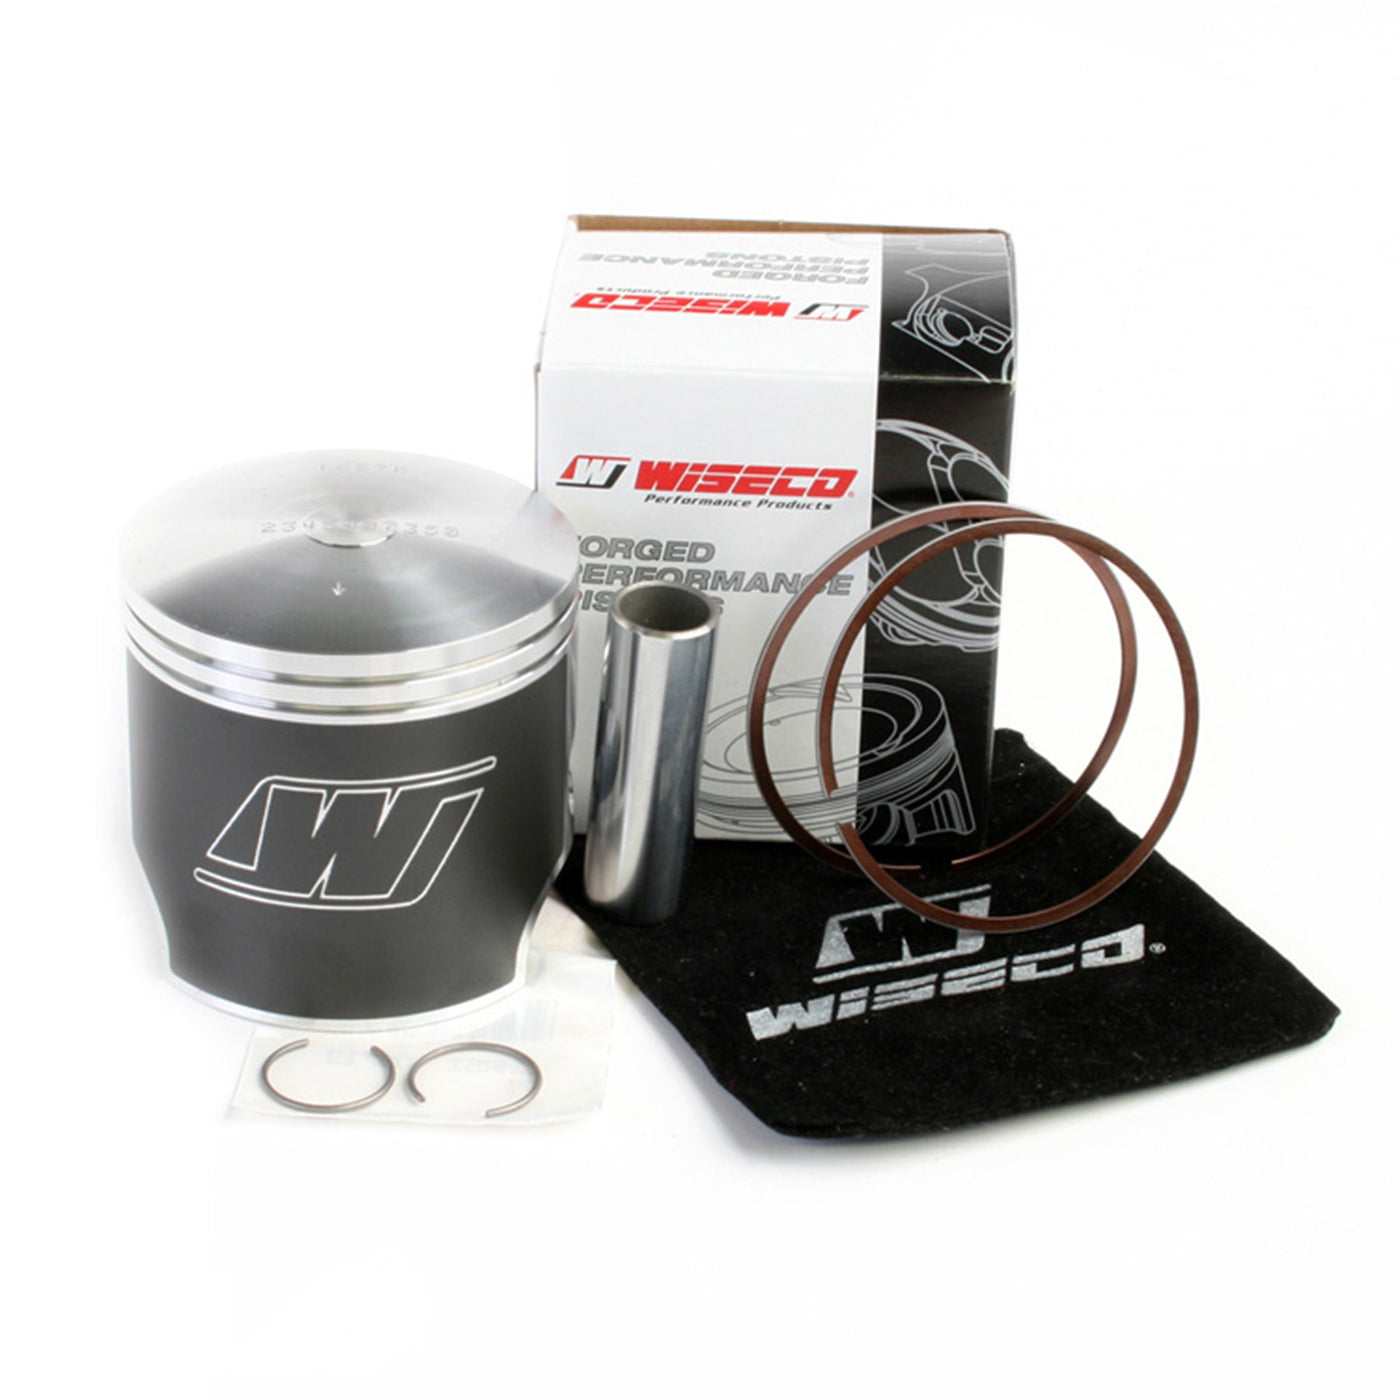 Wiseco PWR128-102 Complete Engine Rebuild Kit #PWR128-102